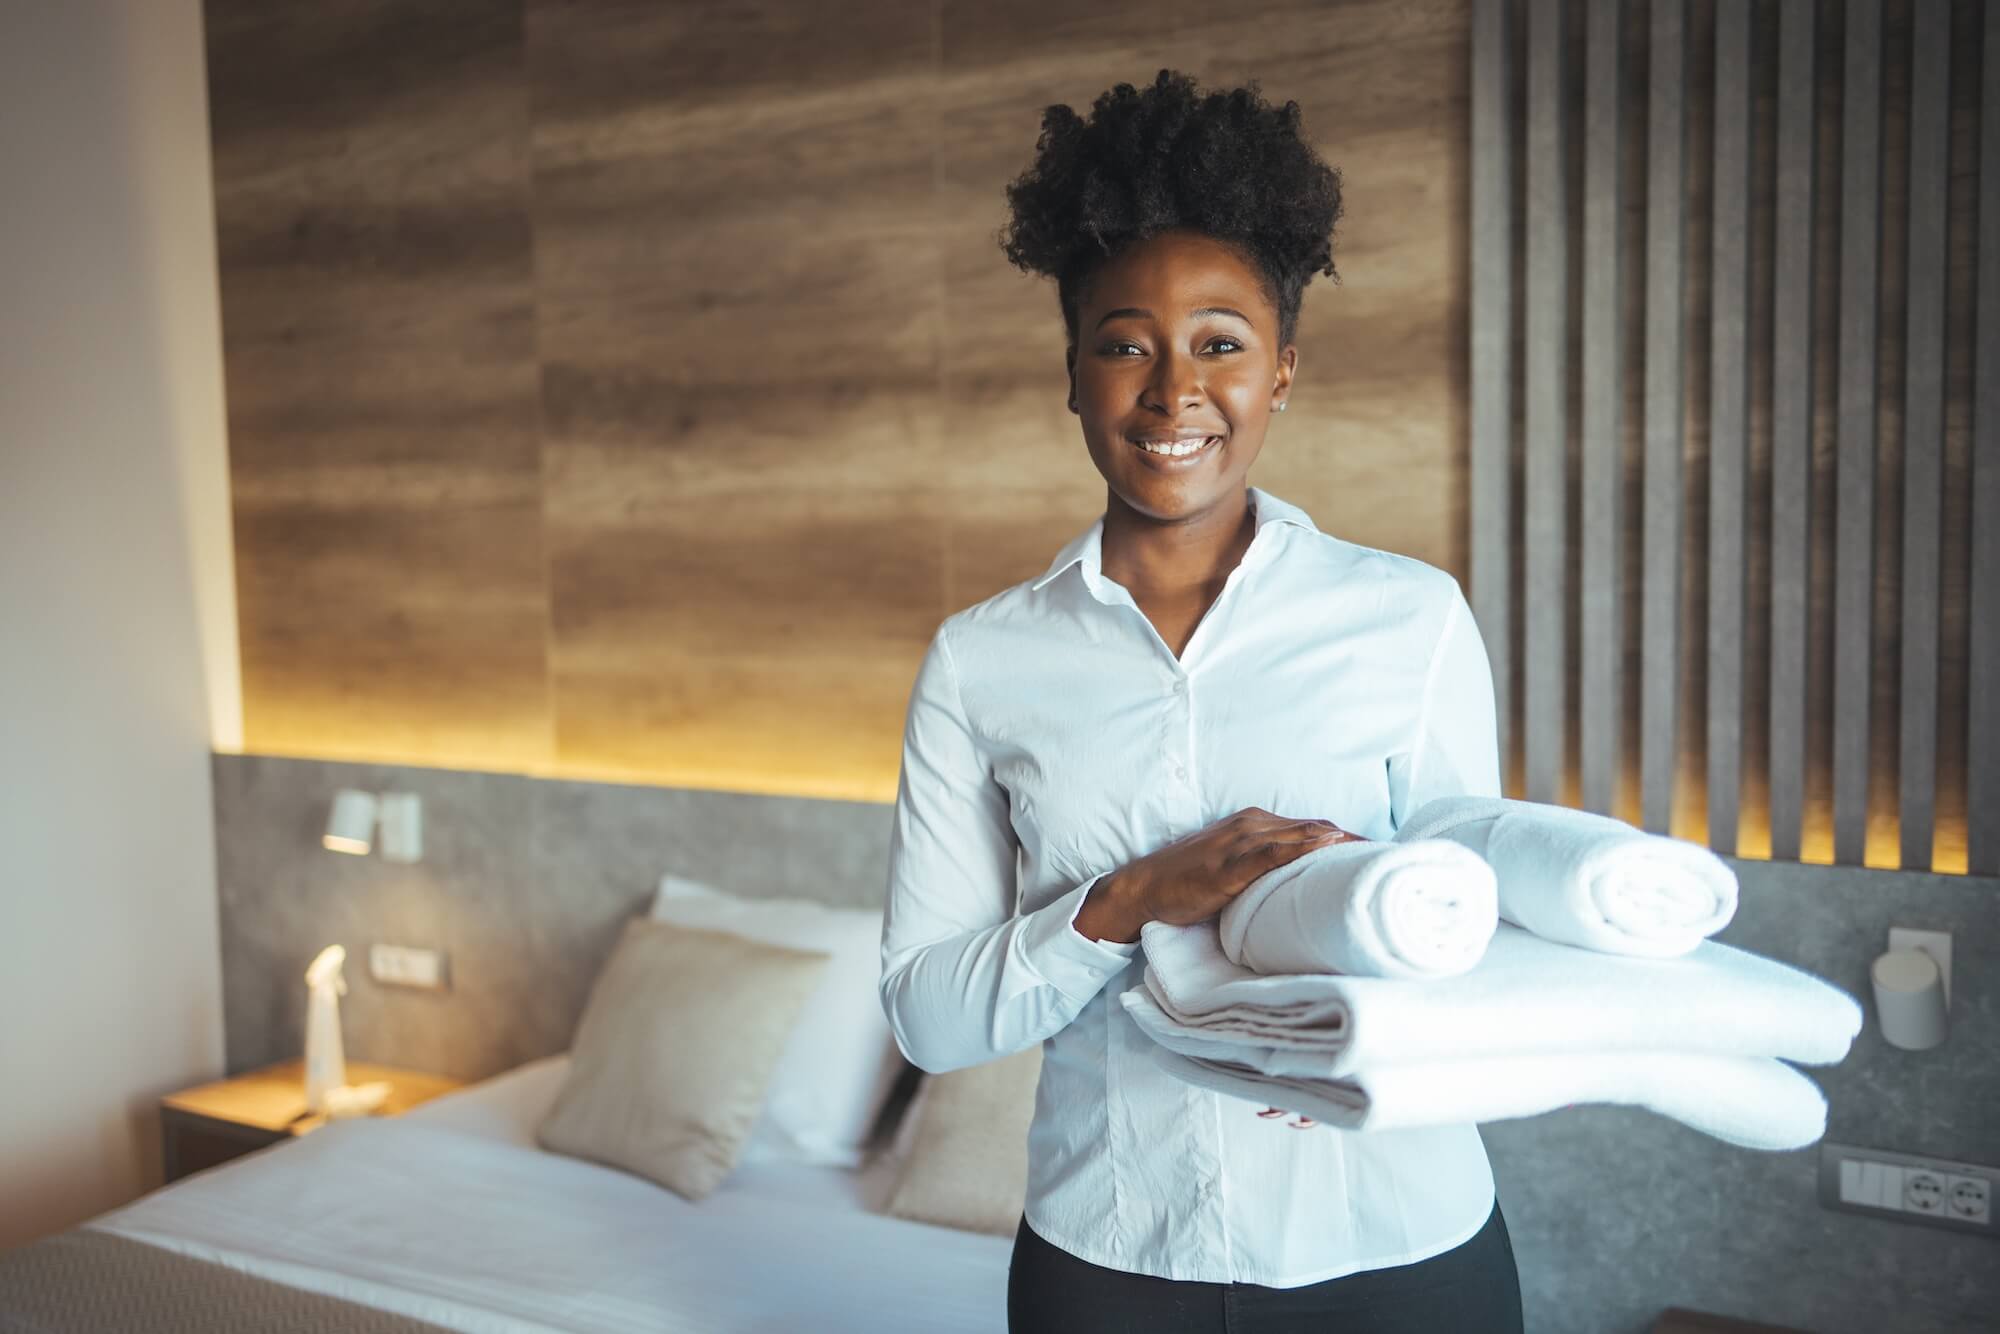 Peachtree City GA Housekeeping services, hire a housekeeper in Peachtree City GA